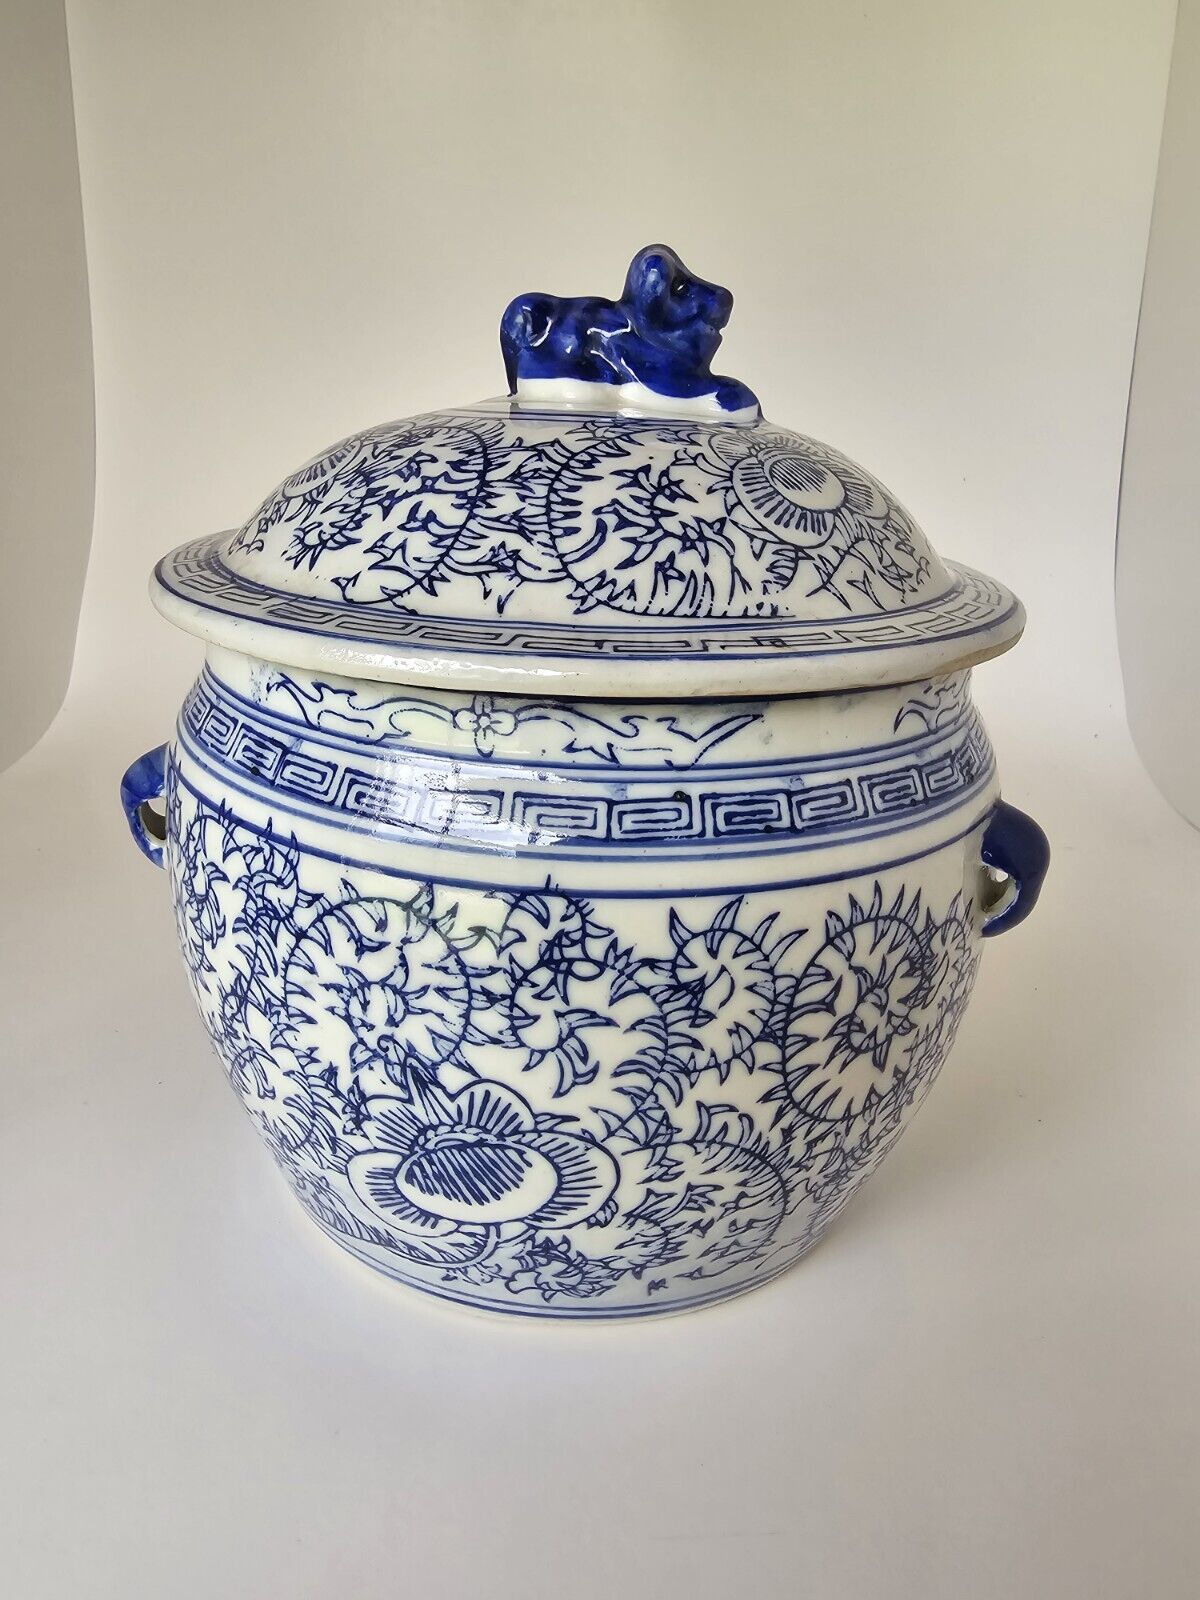 VTG 1970s Blue and White Greek Key Chinoiserie Bowl / Chinese Rice Bowl 